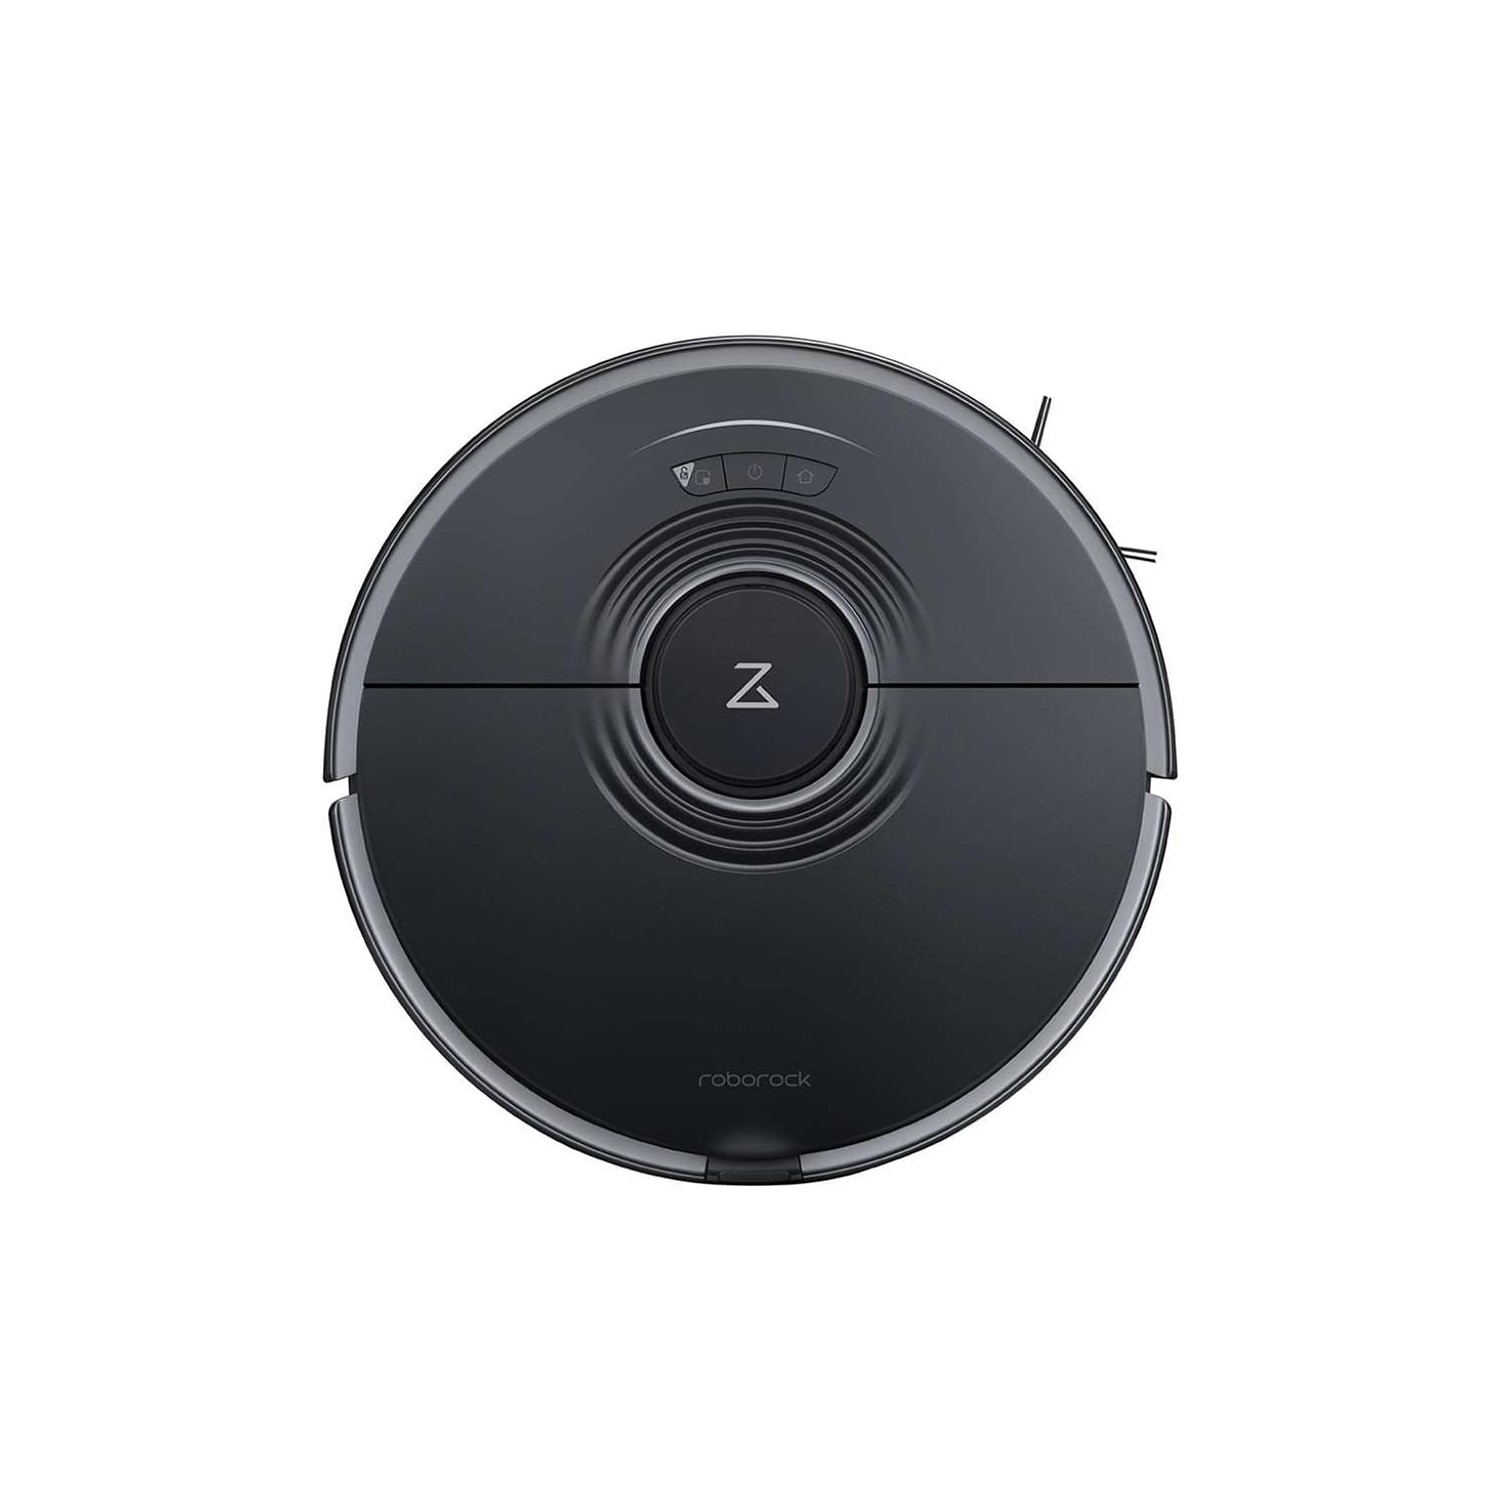 Roborock S7 Robotic Vacuum Cleaner and Mop - 2500Pa Suction